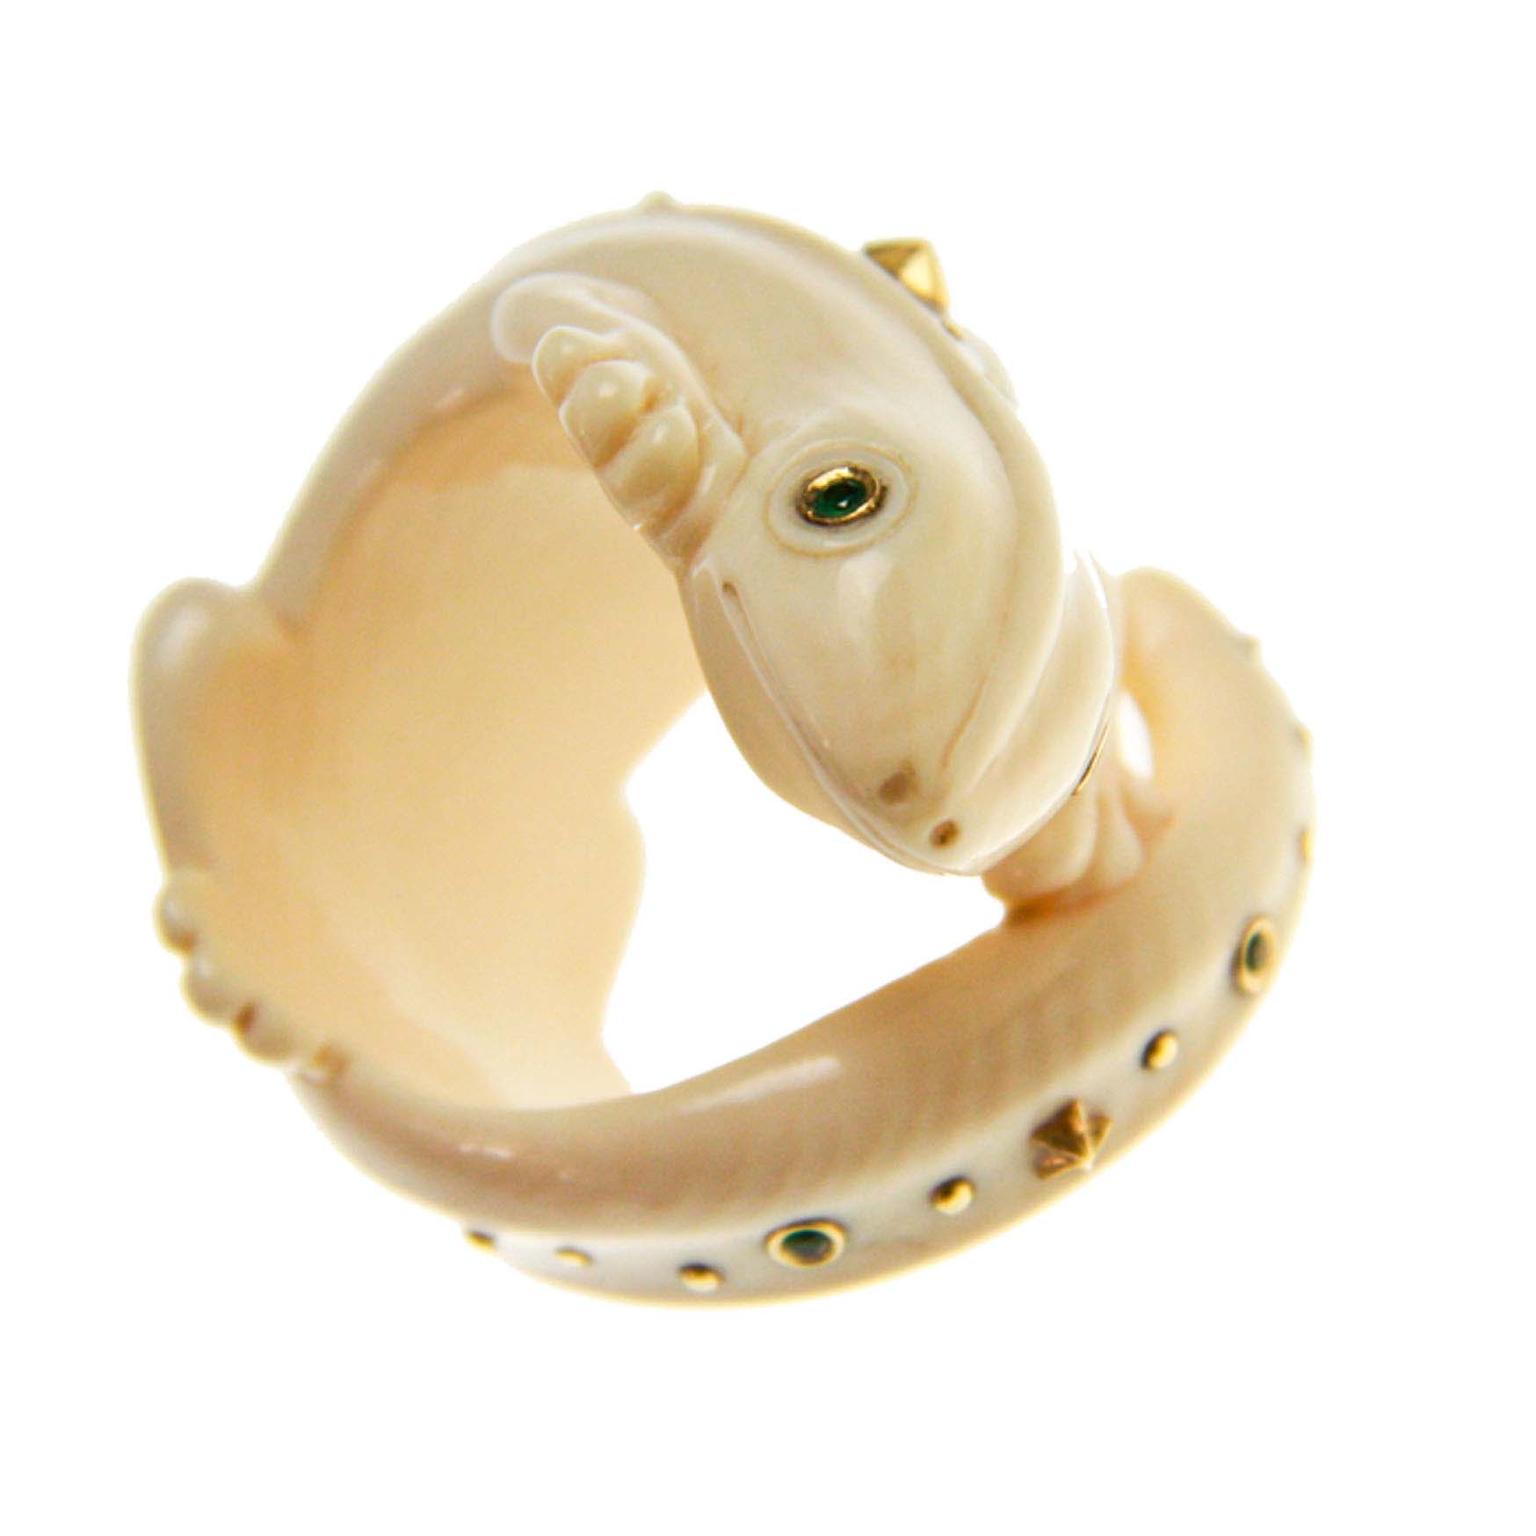 Bibi van der Velden Gecko ring made from carved woolly mammoth tooth, with yellow gold and green tsavorites